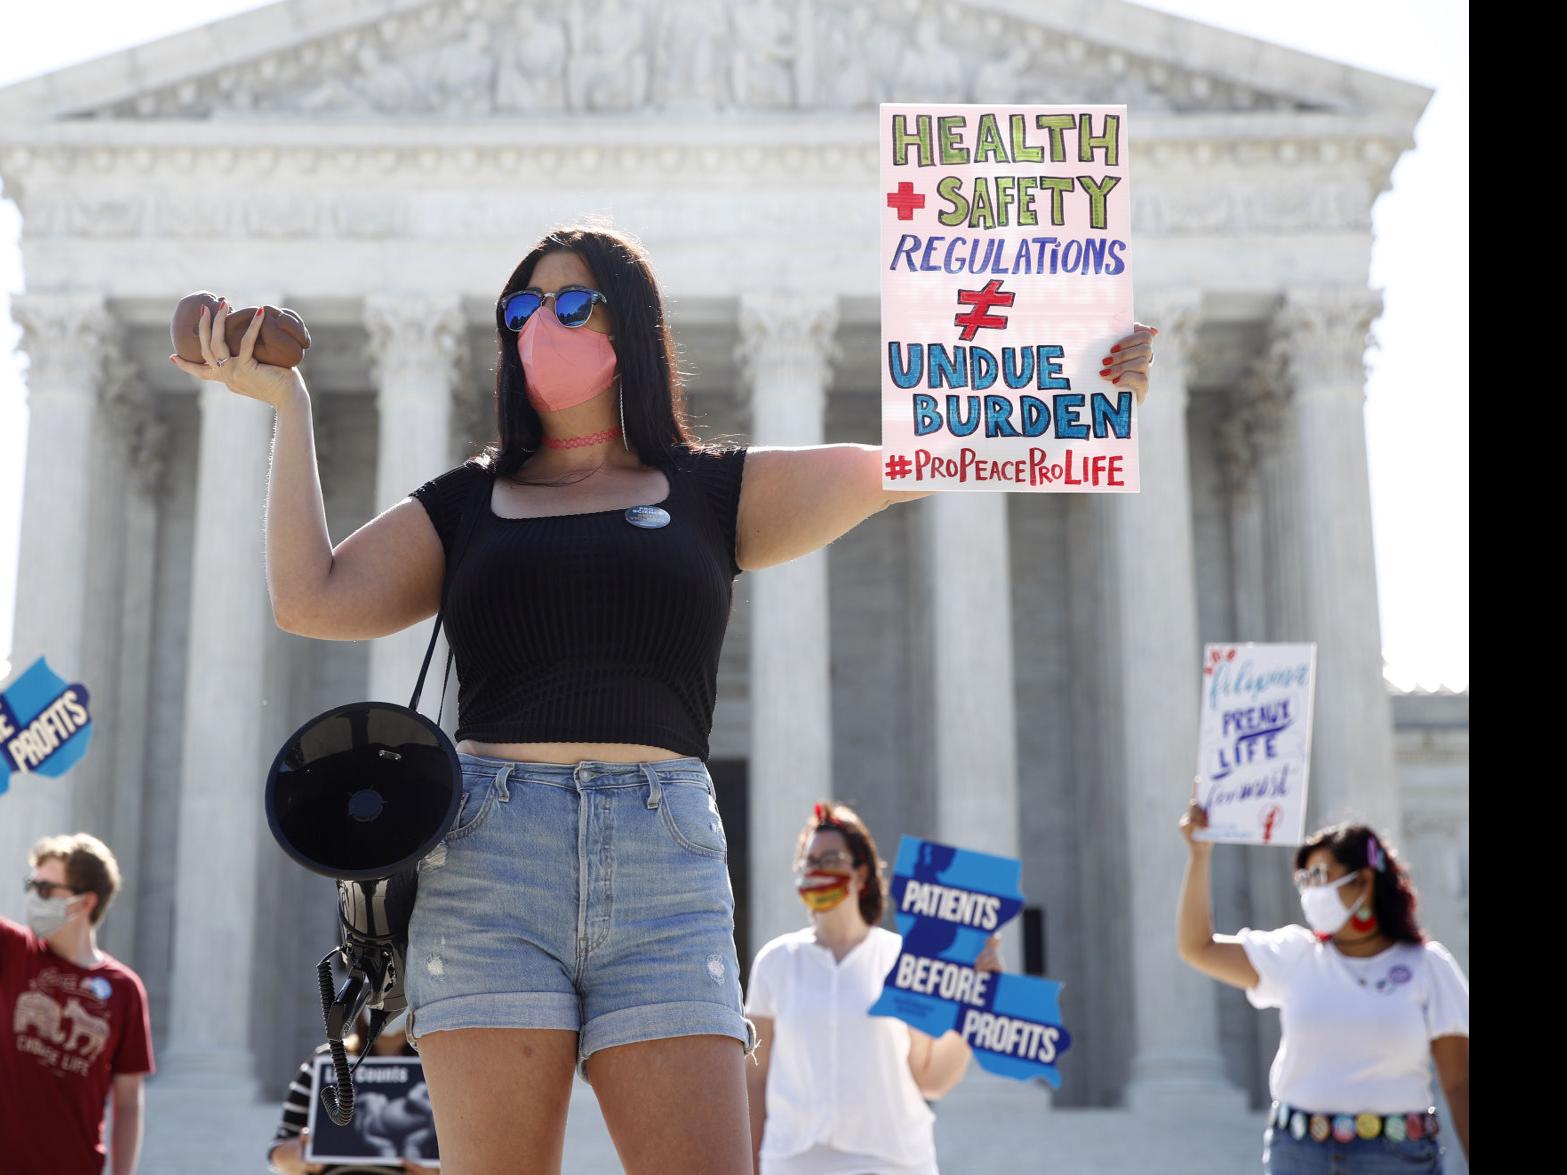 Supreme Court strikes down Louisiana abortion law: Here's how each